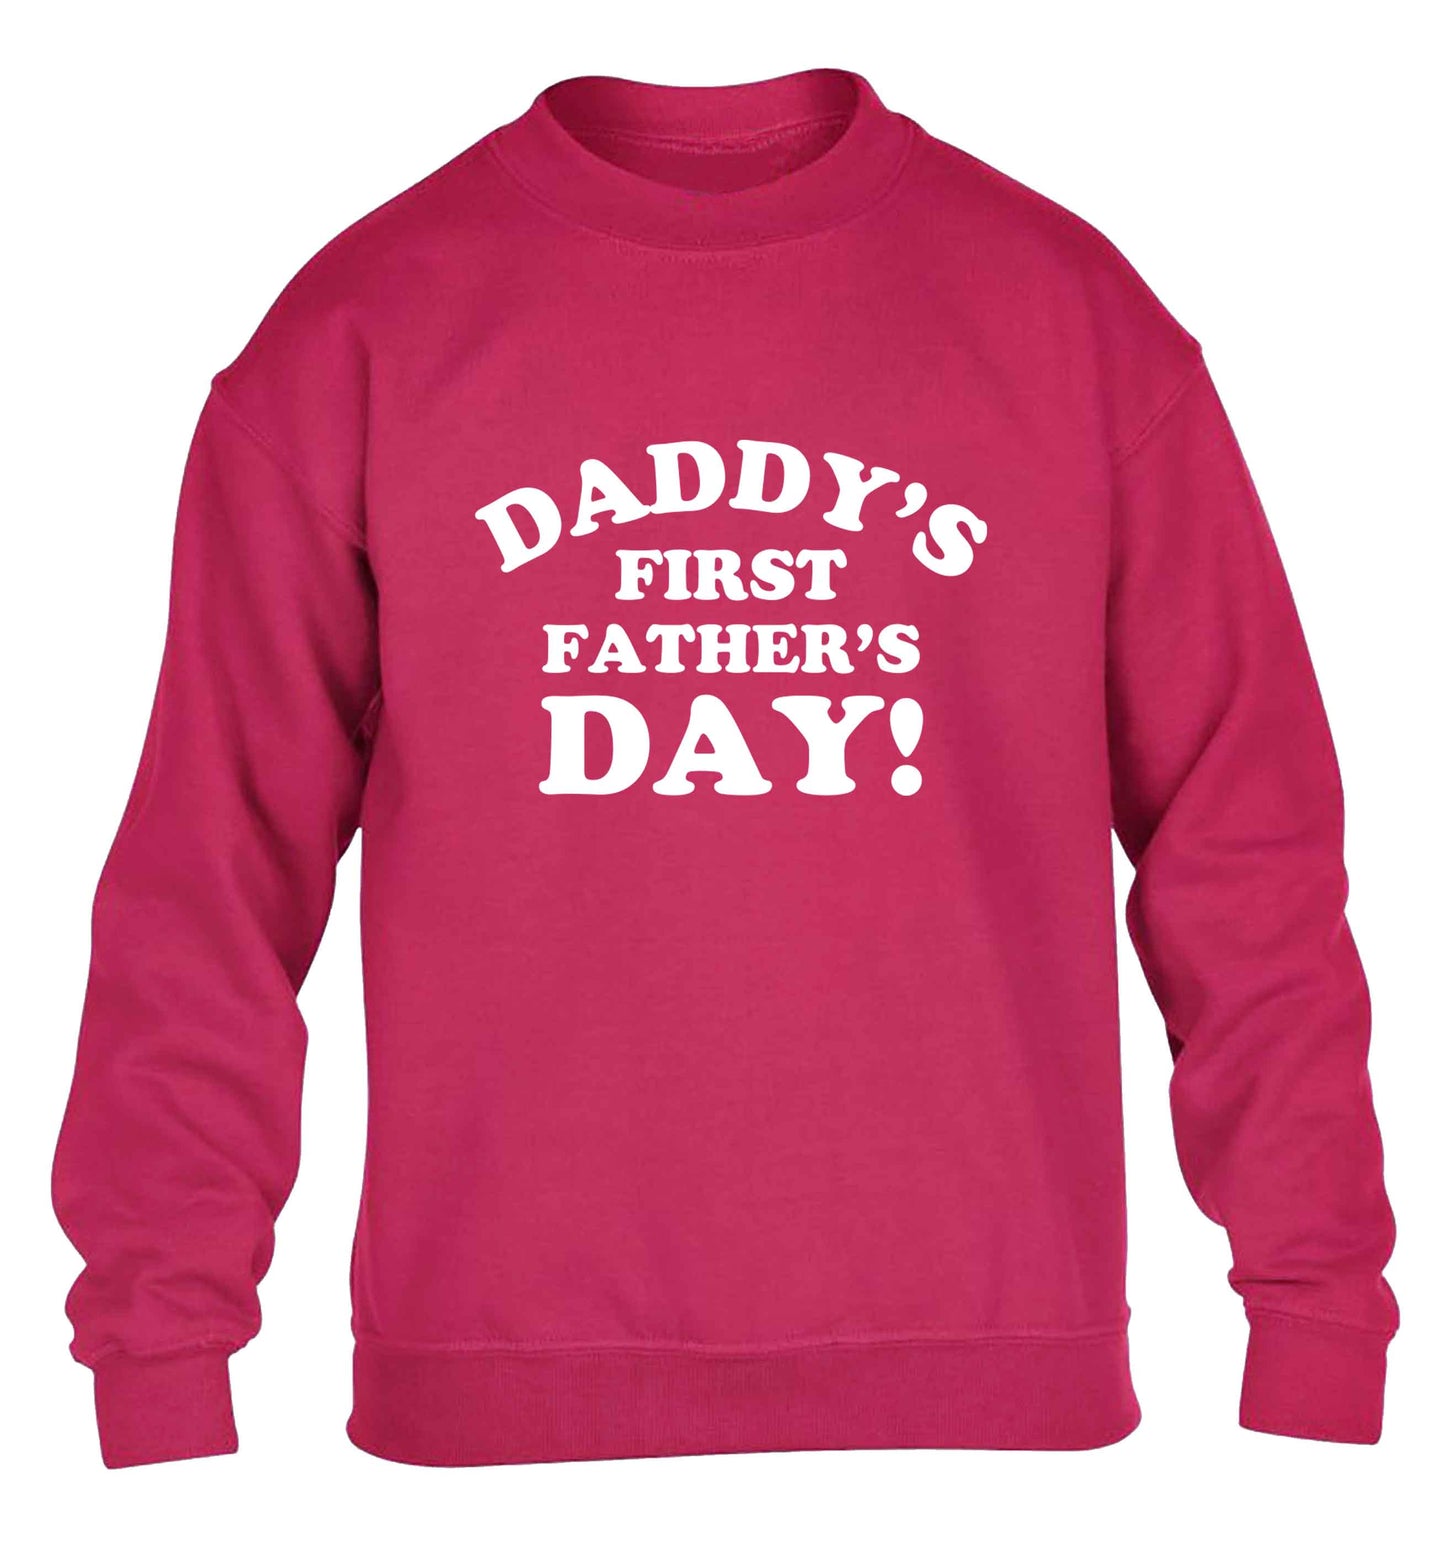 Daddy's first father's day children's pink sweater 12-13 Years